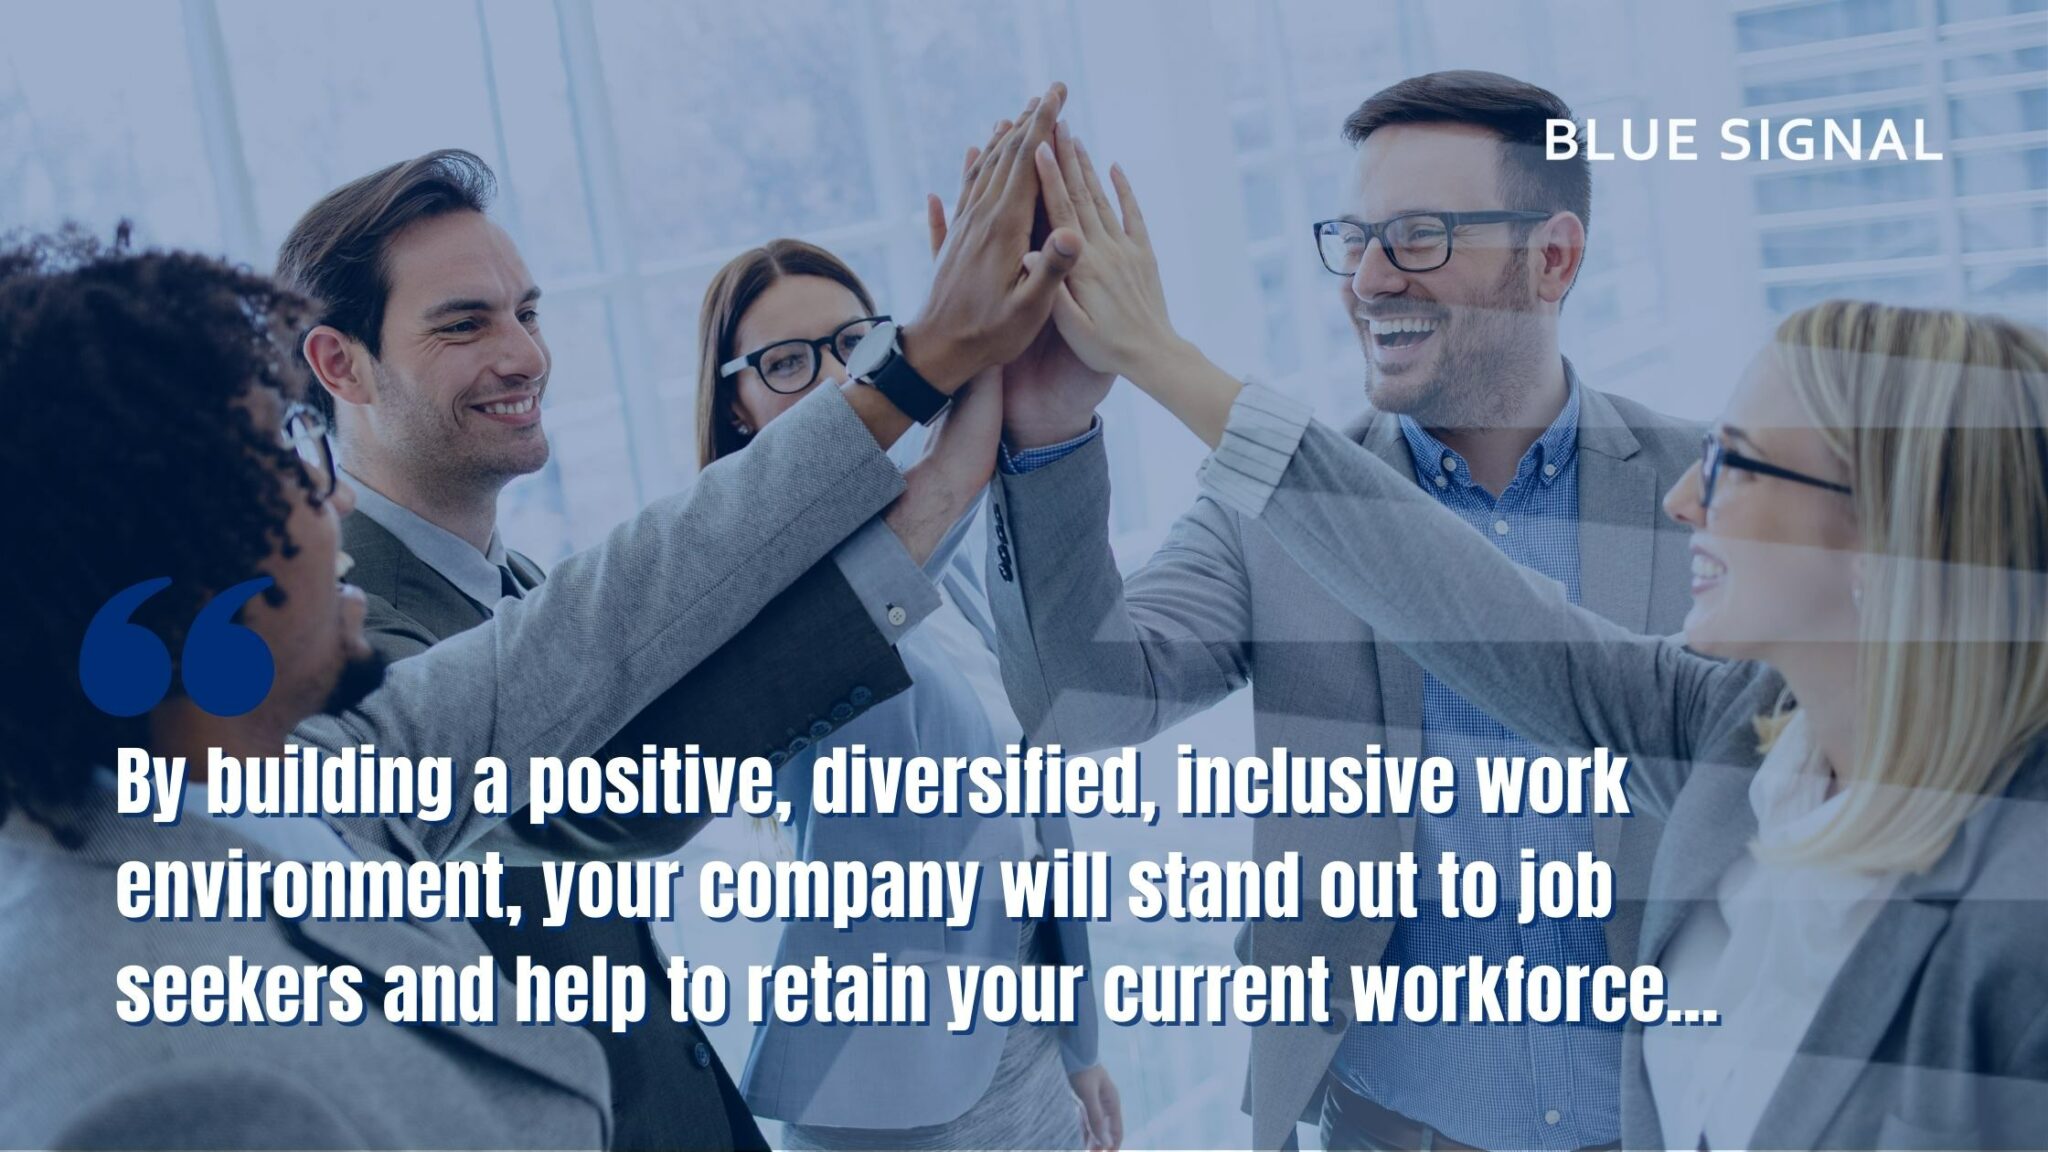 A group of employees high fiving with a quote overlayed on the image reading "By building a positive, diversified, inclusive work environment, your company will stand out to job seekers and help to retain your current workforce."